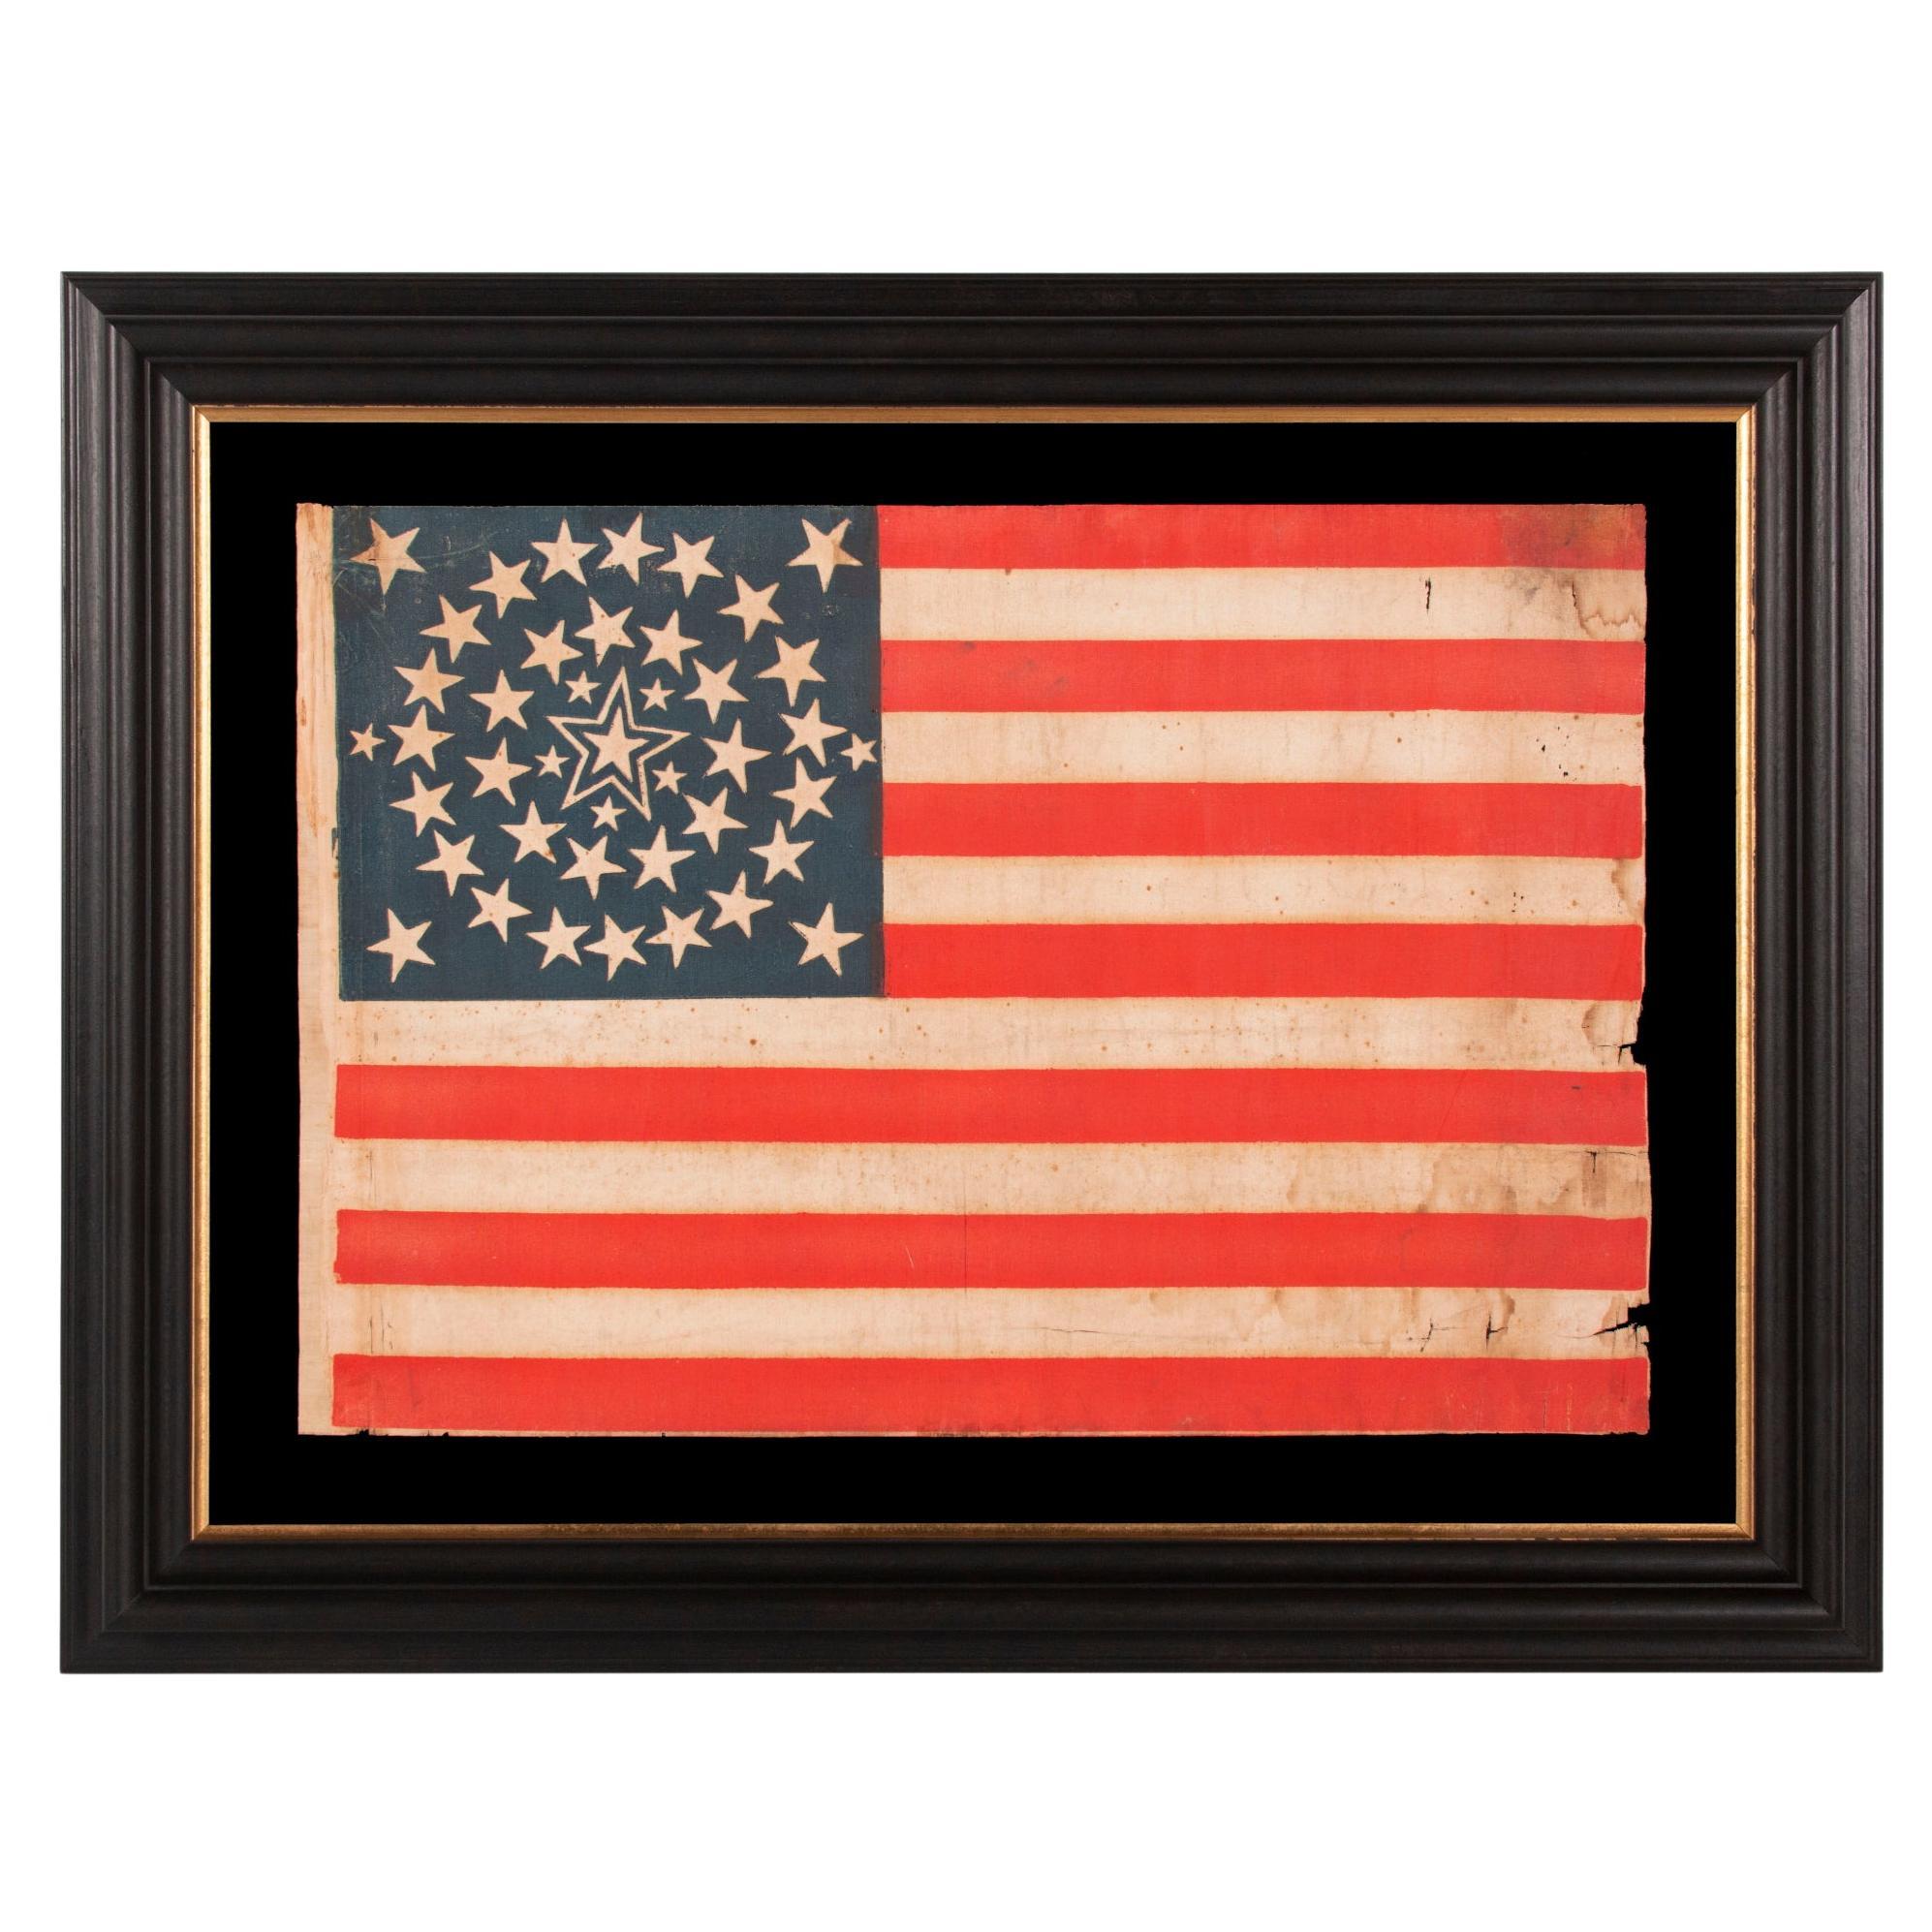 42 Stars American Flag with Stars in a Medallion Configuration, Washington State